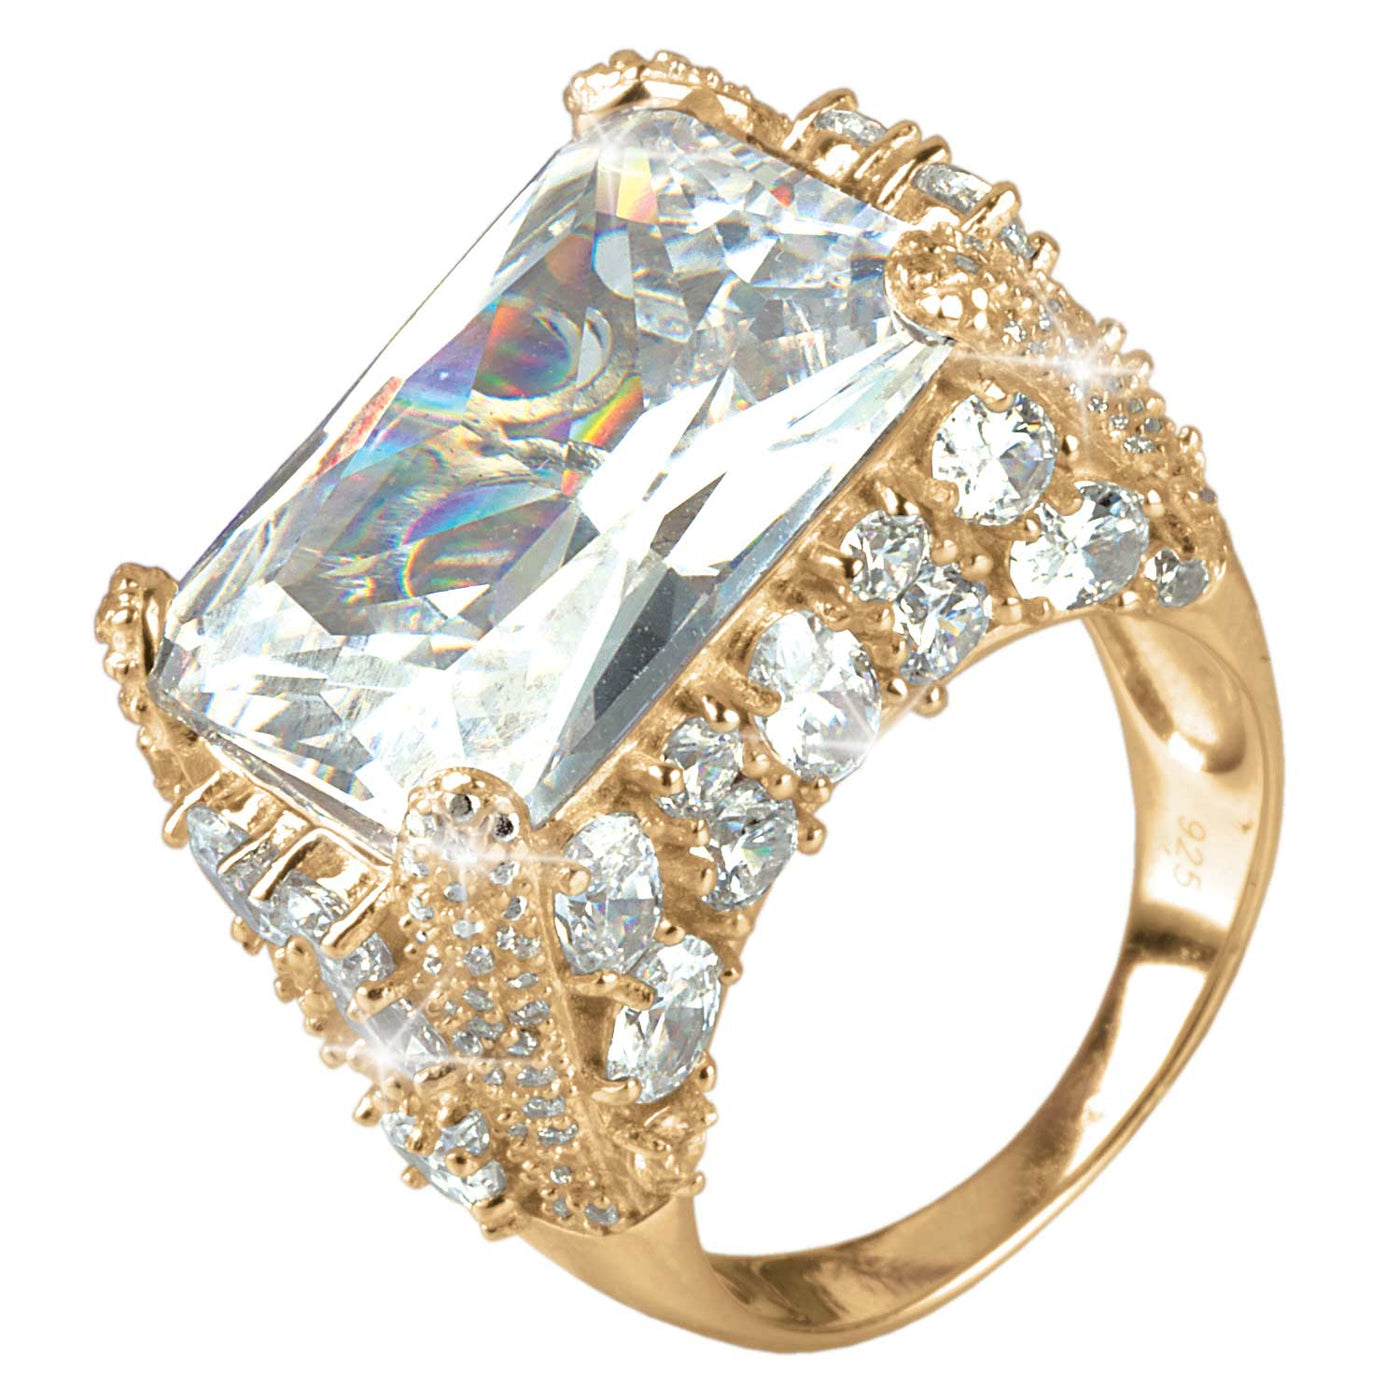 Daniel Steiger Limited Edition Lumiere Ring